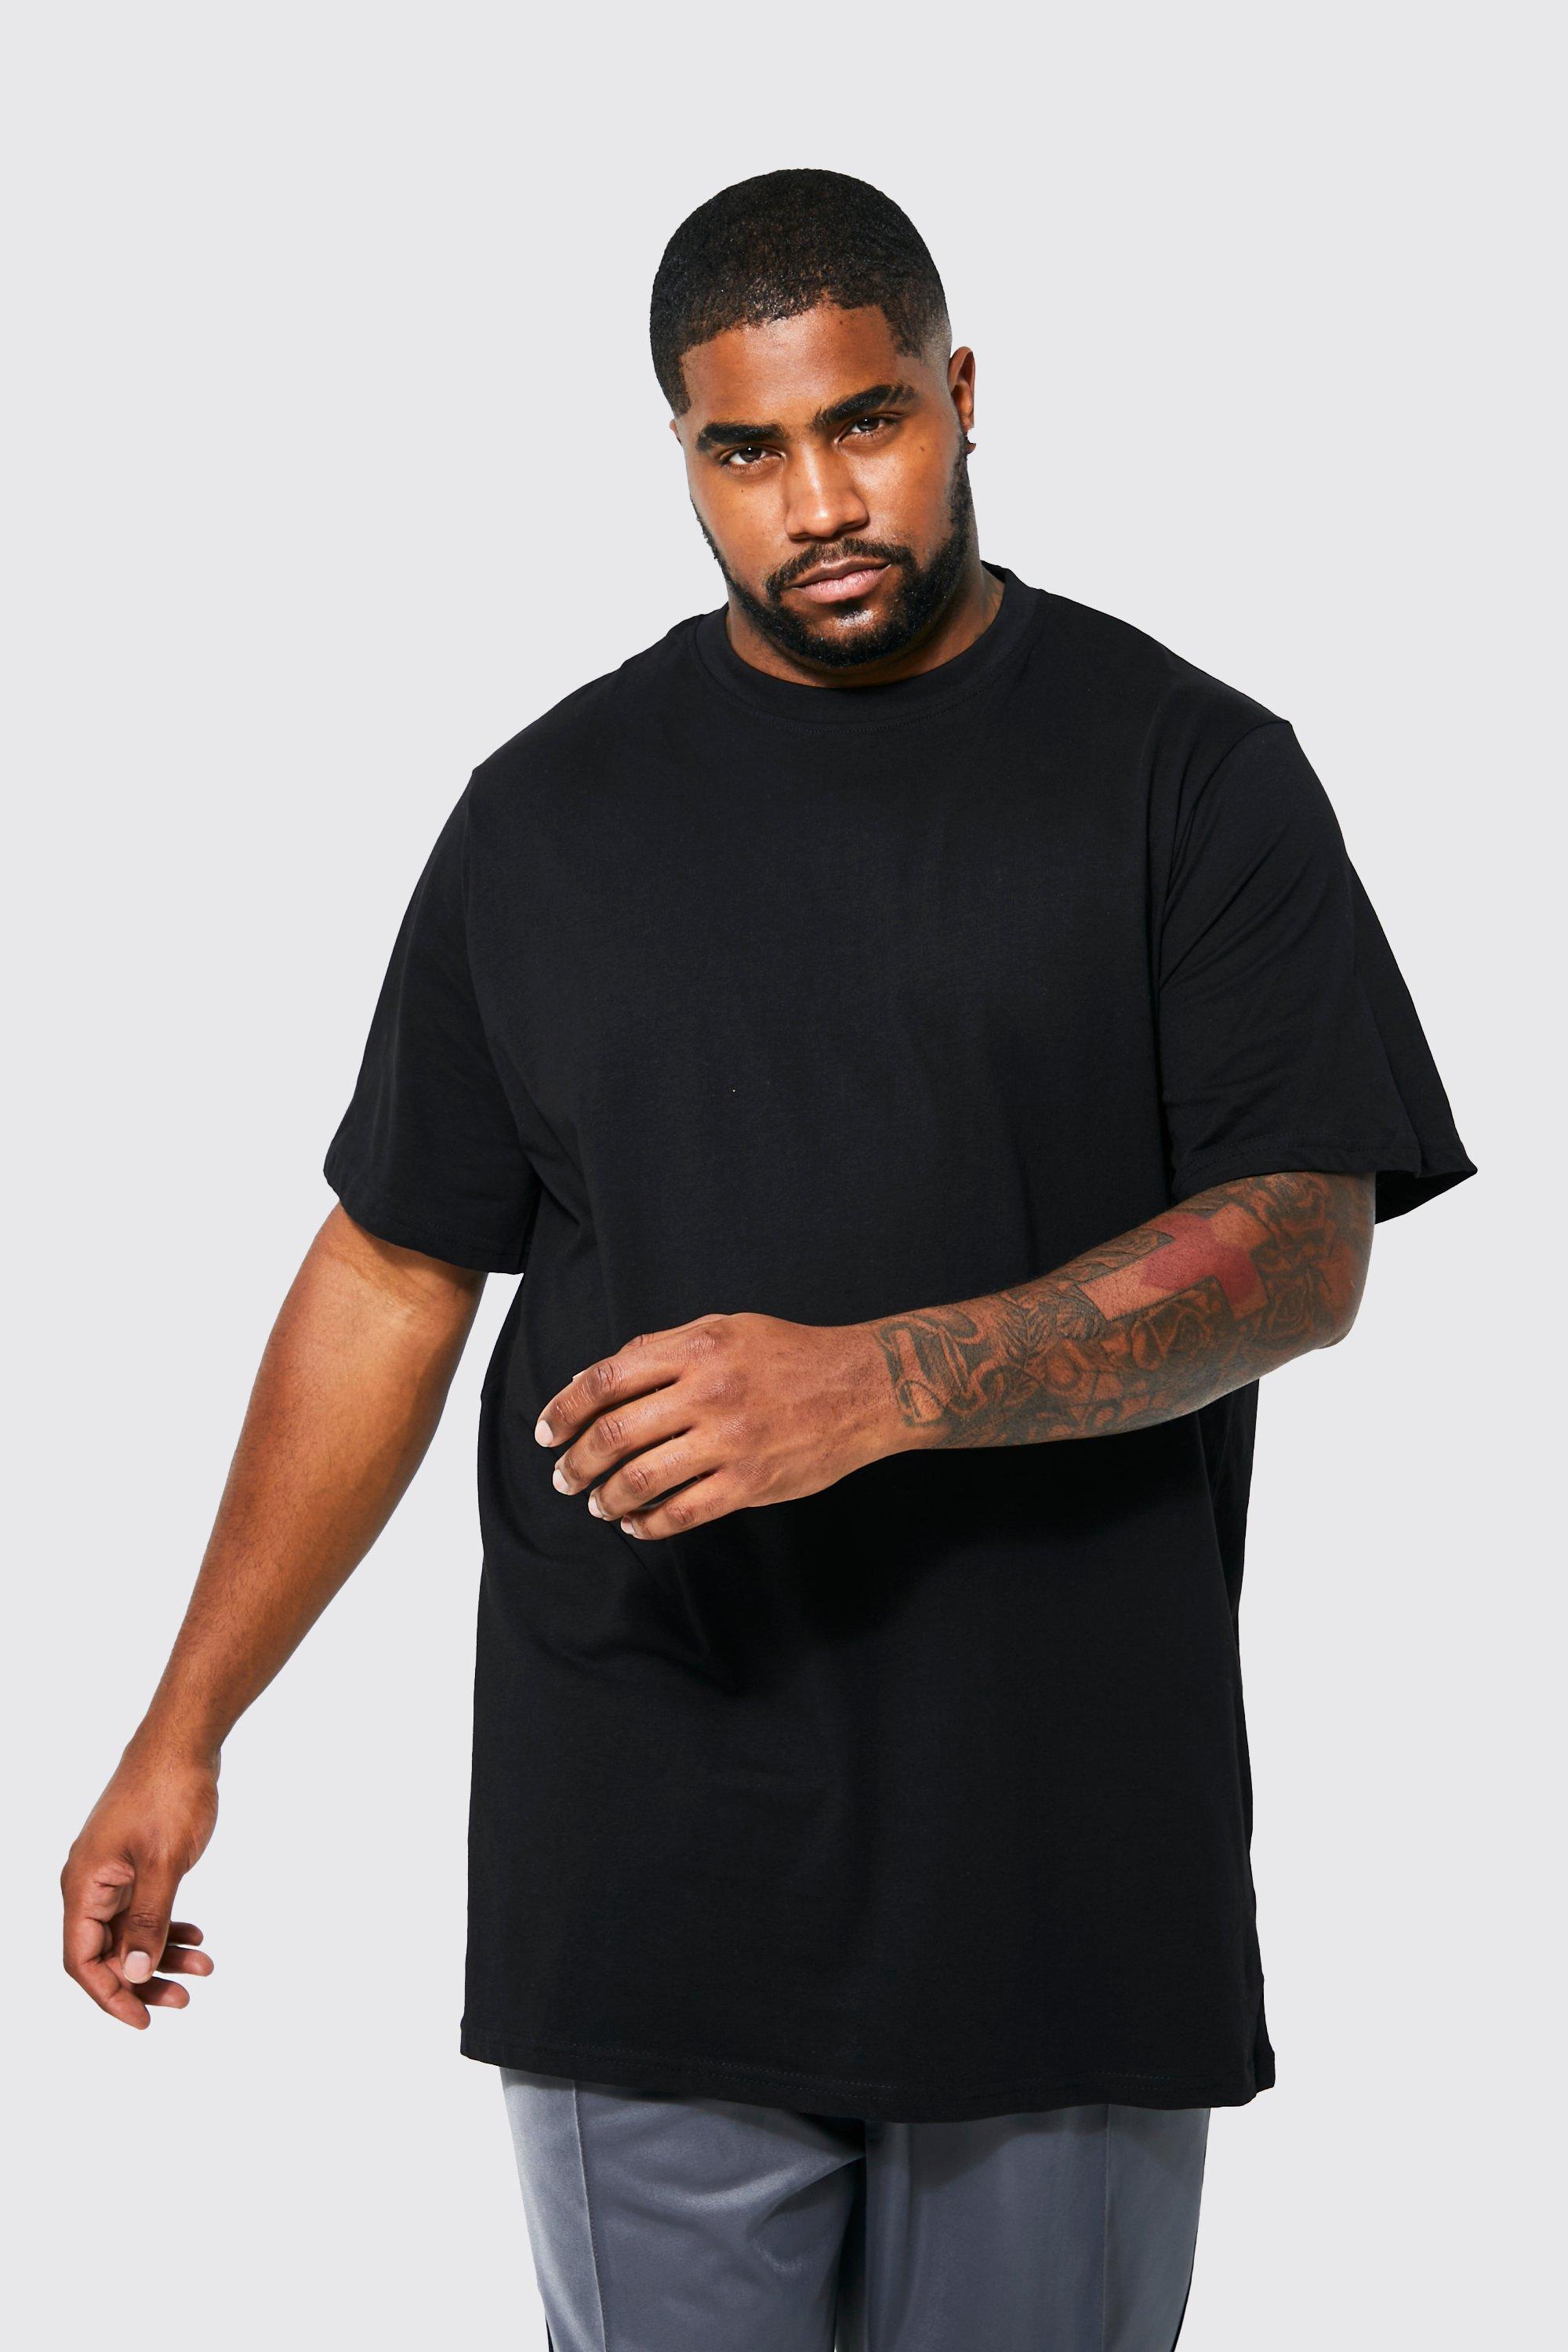 Mart rynker excentrisk Big Mens T-Shirts | 3XL T-Shirts For Men | Plus Size Tees | boohooMAN UK